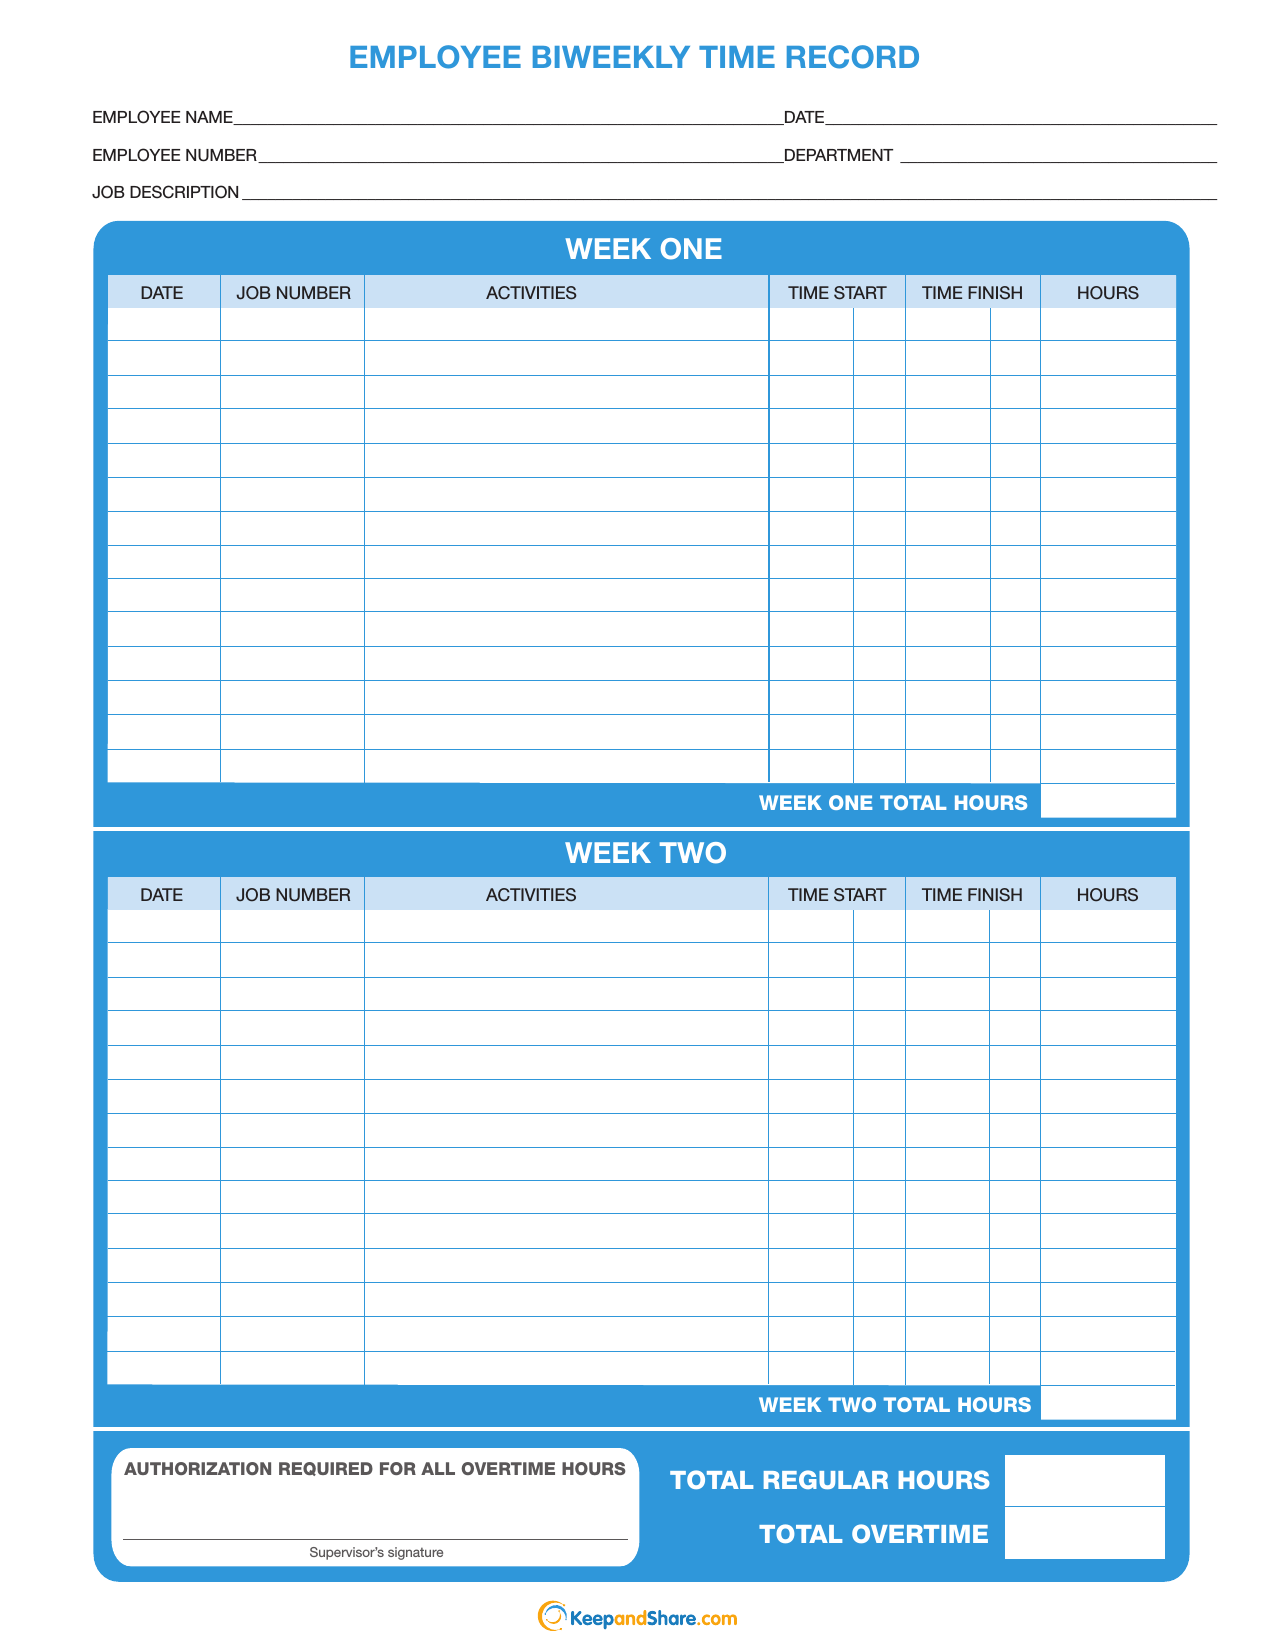 excel-biweekly-timesheet-template-collection